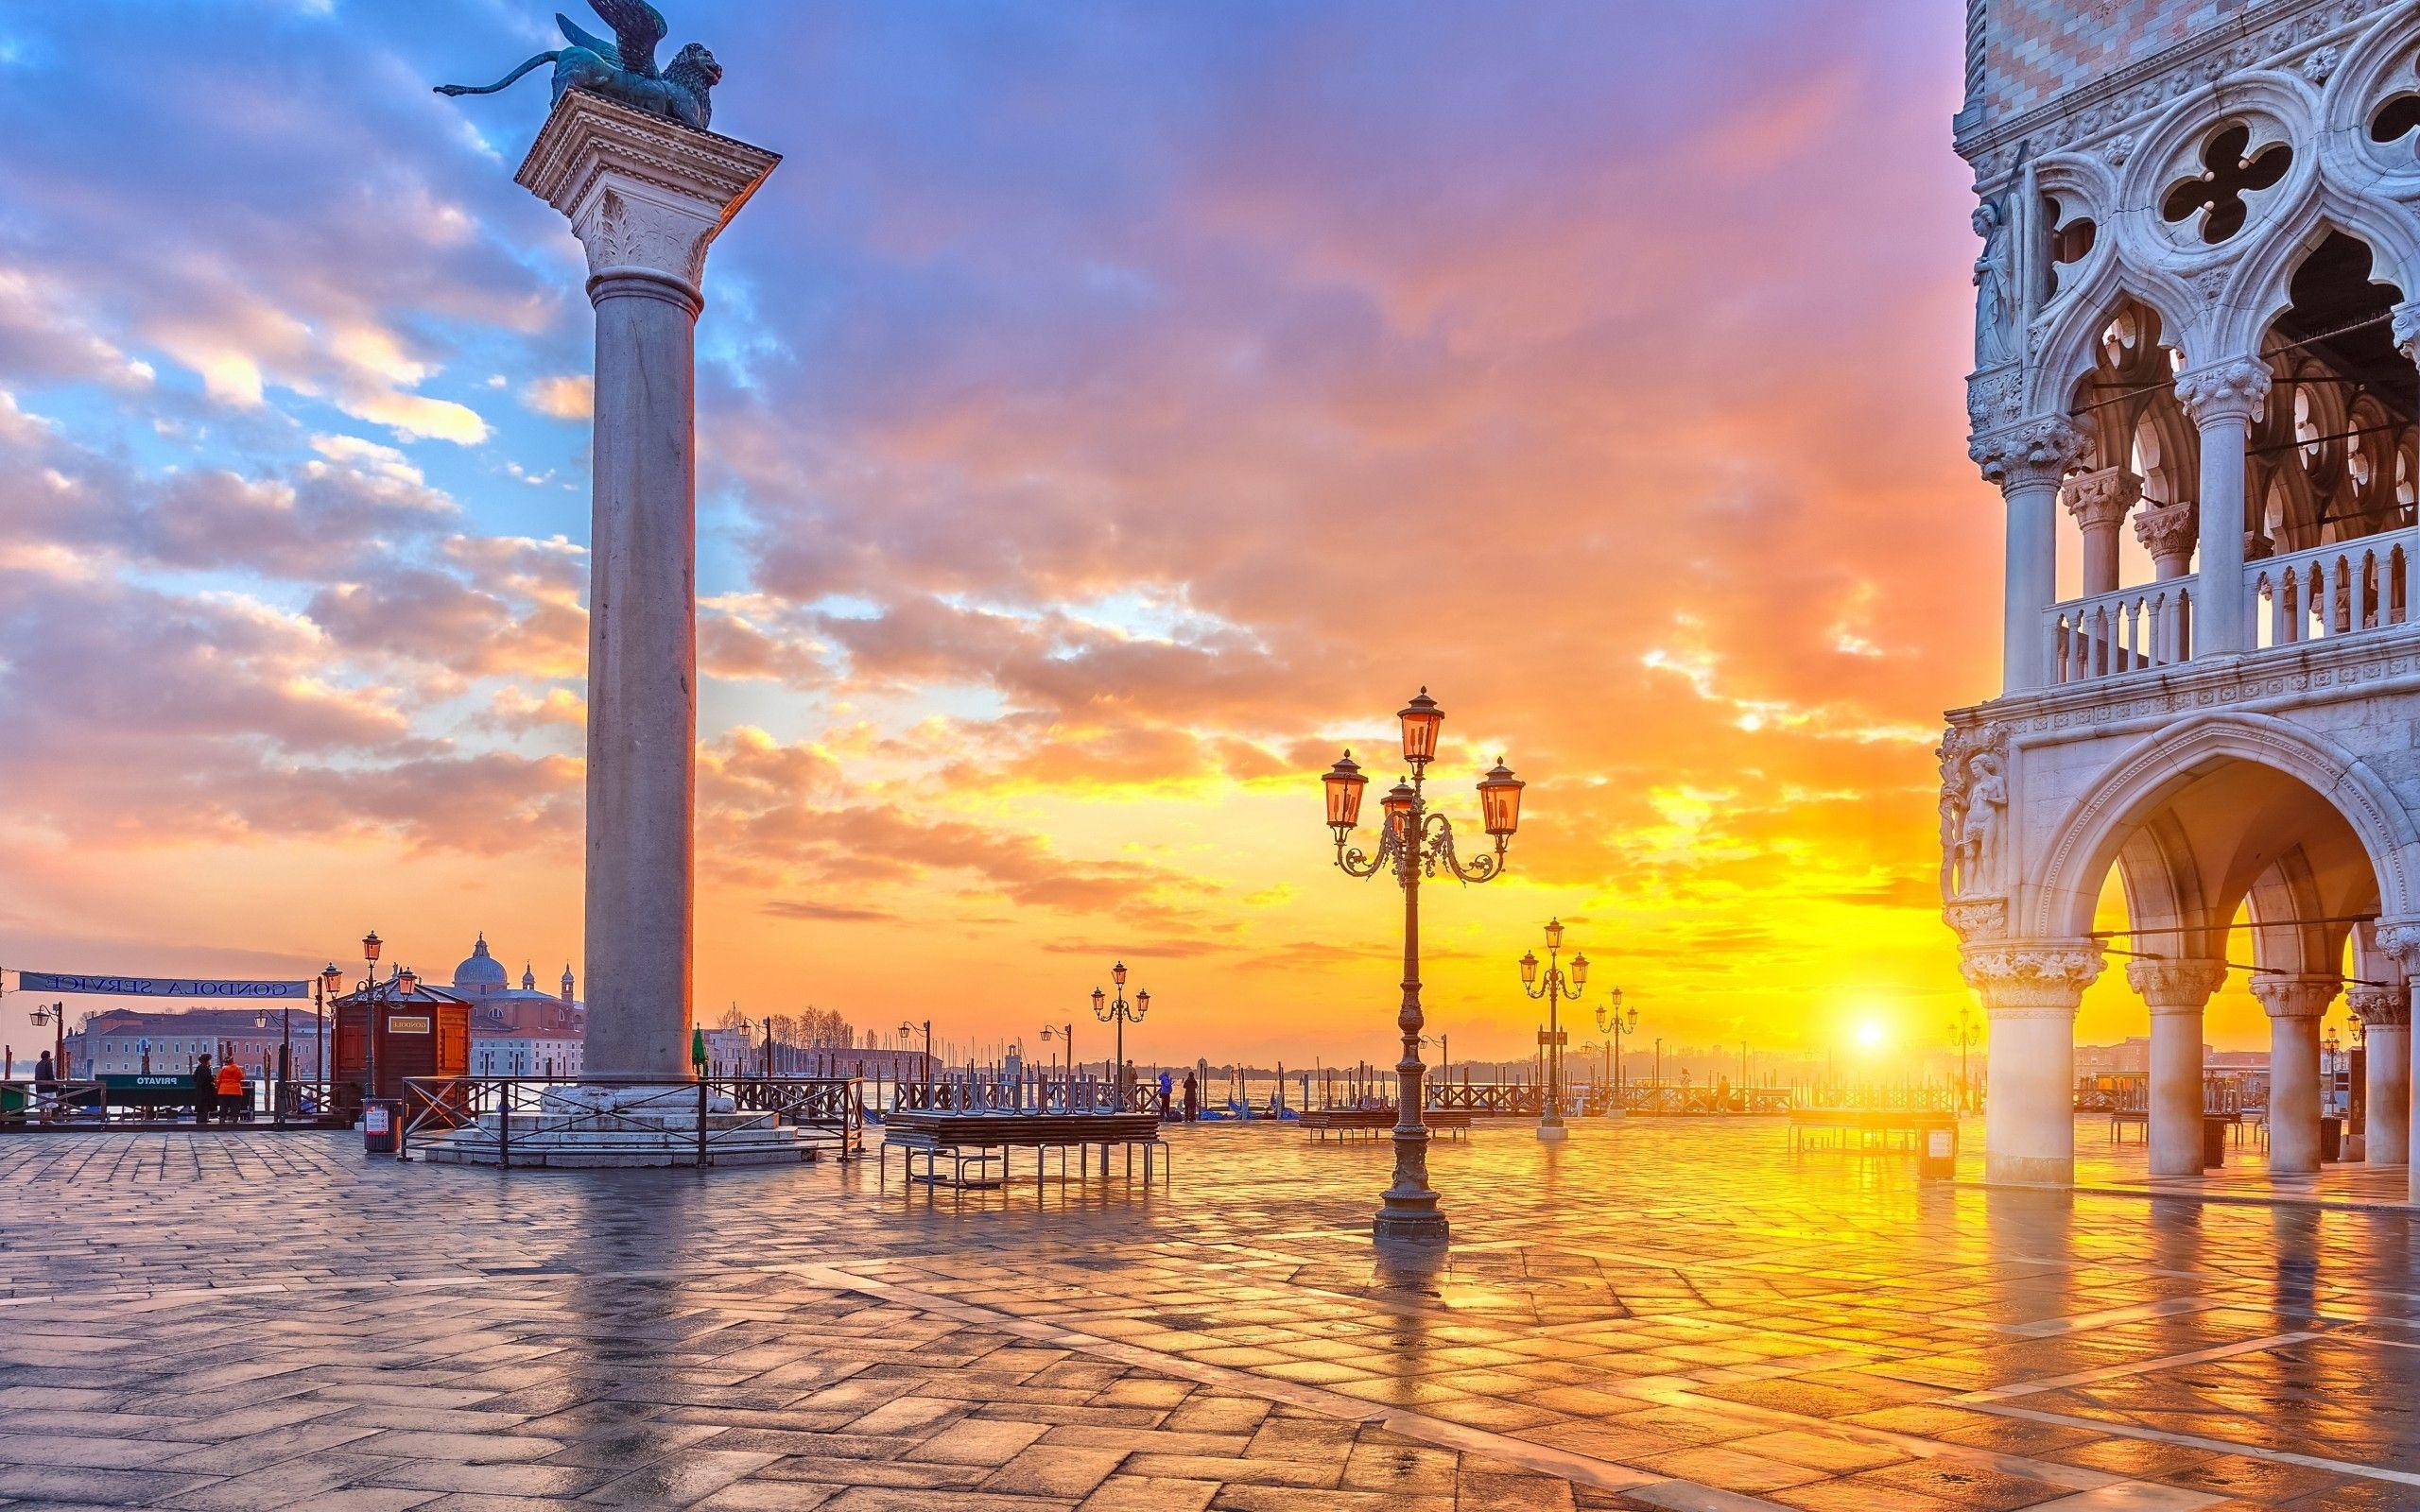 Italy HD Wallpaper Image Picture Photo Download